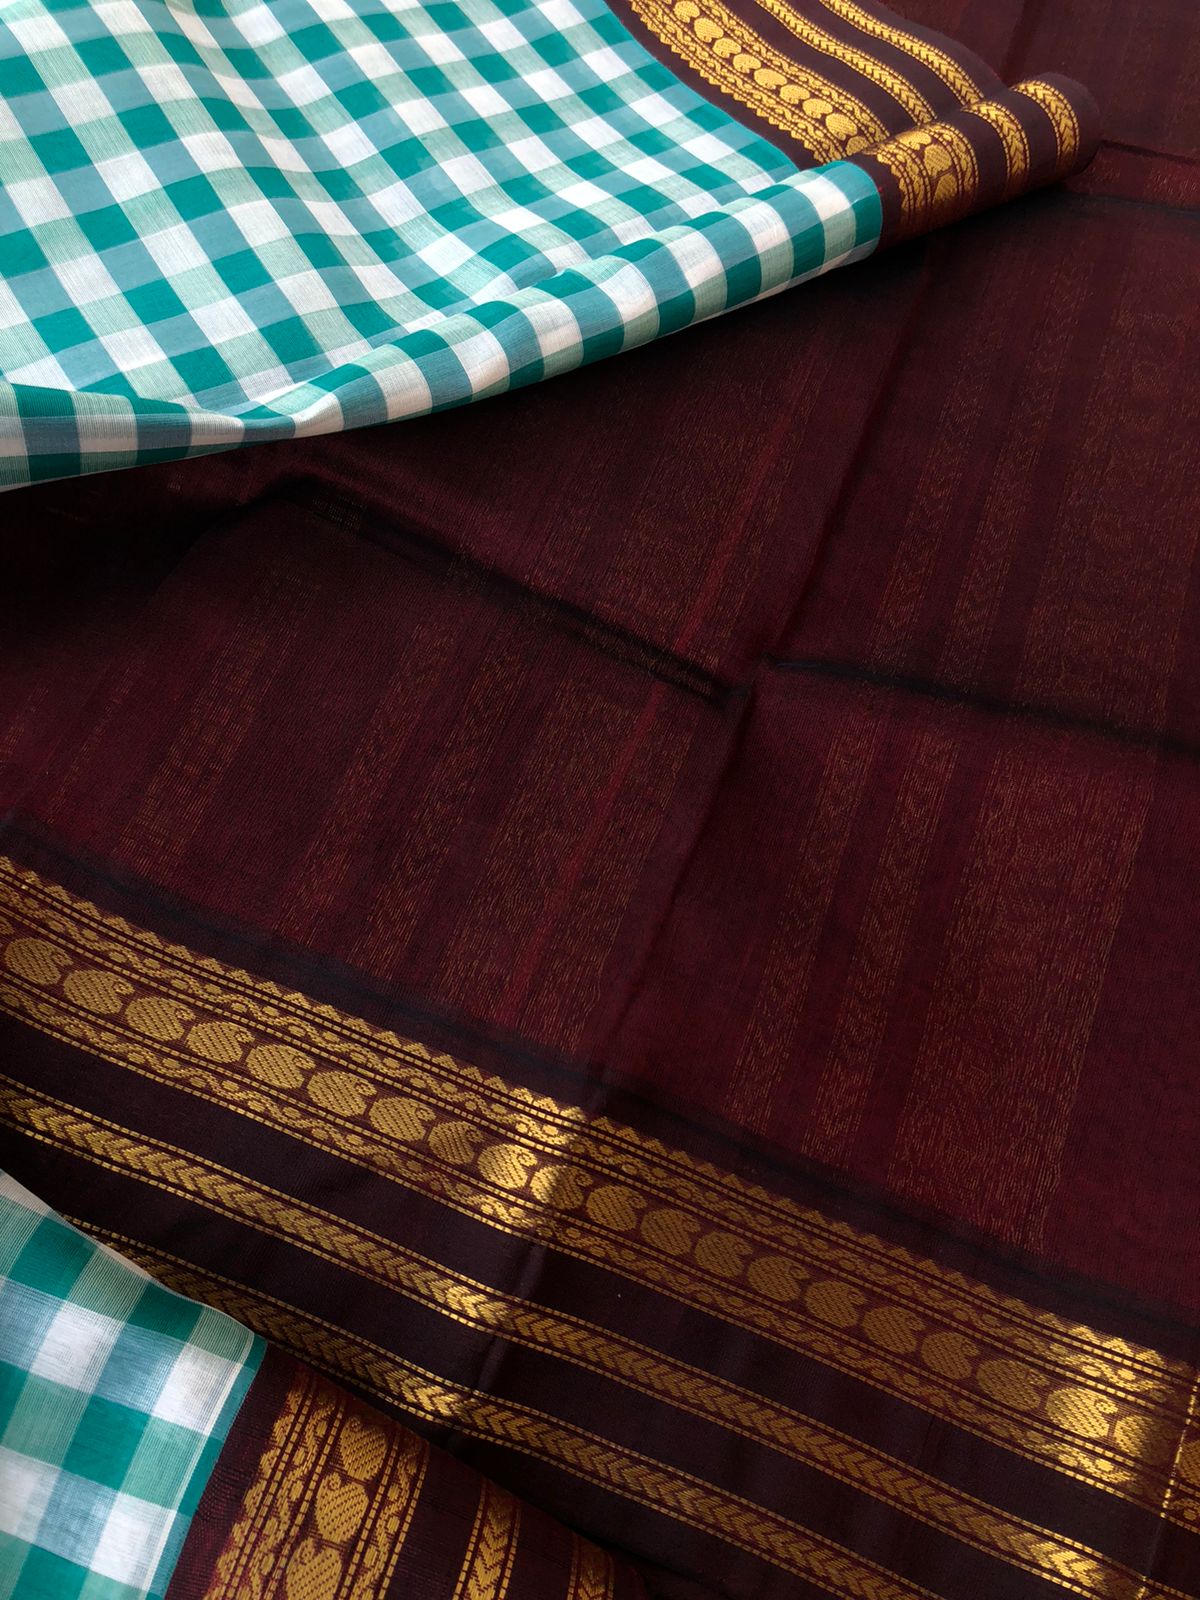 Paalum palamum kattam on Korvai Silk Cotton - off white and teal blue chex with deep maroon brown pallu and blouse